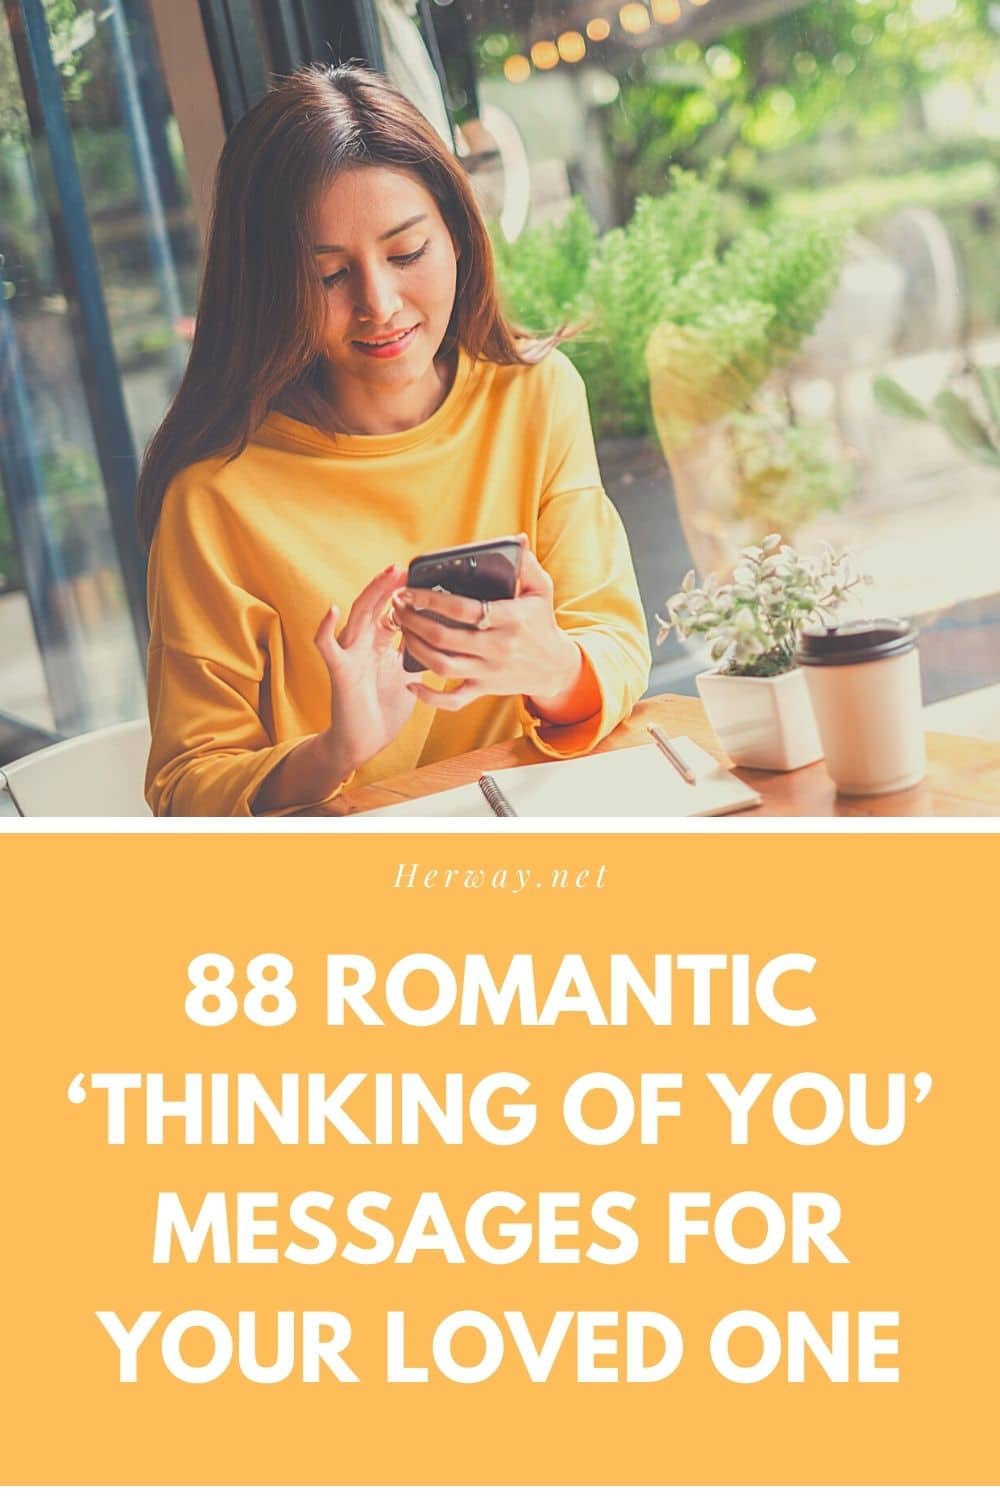 88 Romantic ‘Thinking Of You’ Messages For Your Loved One